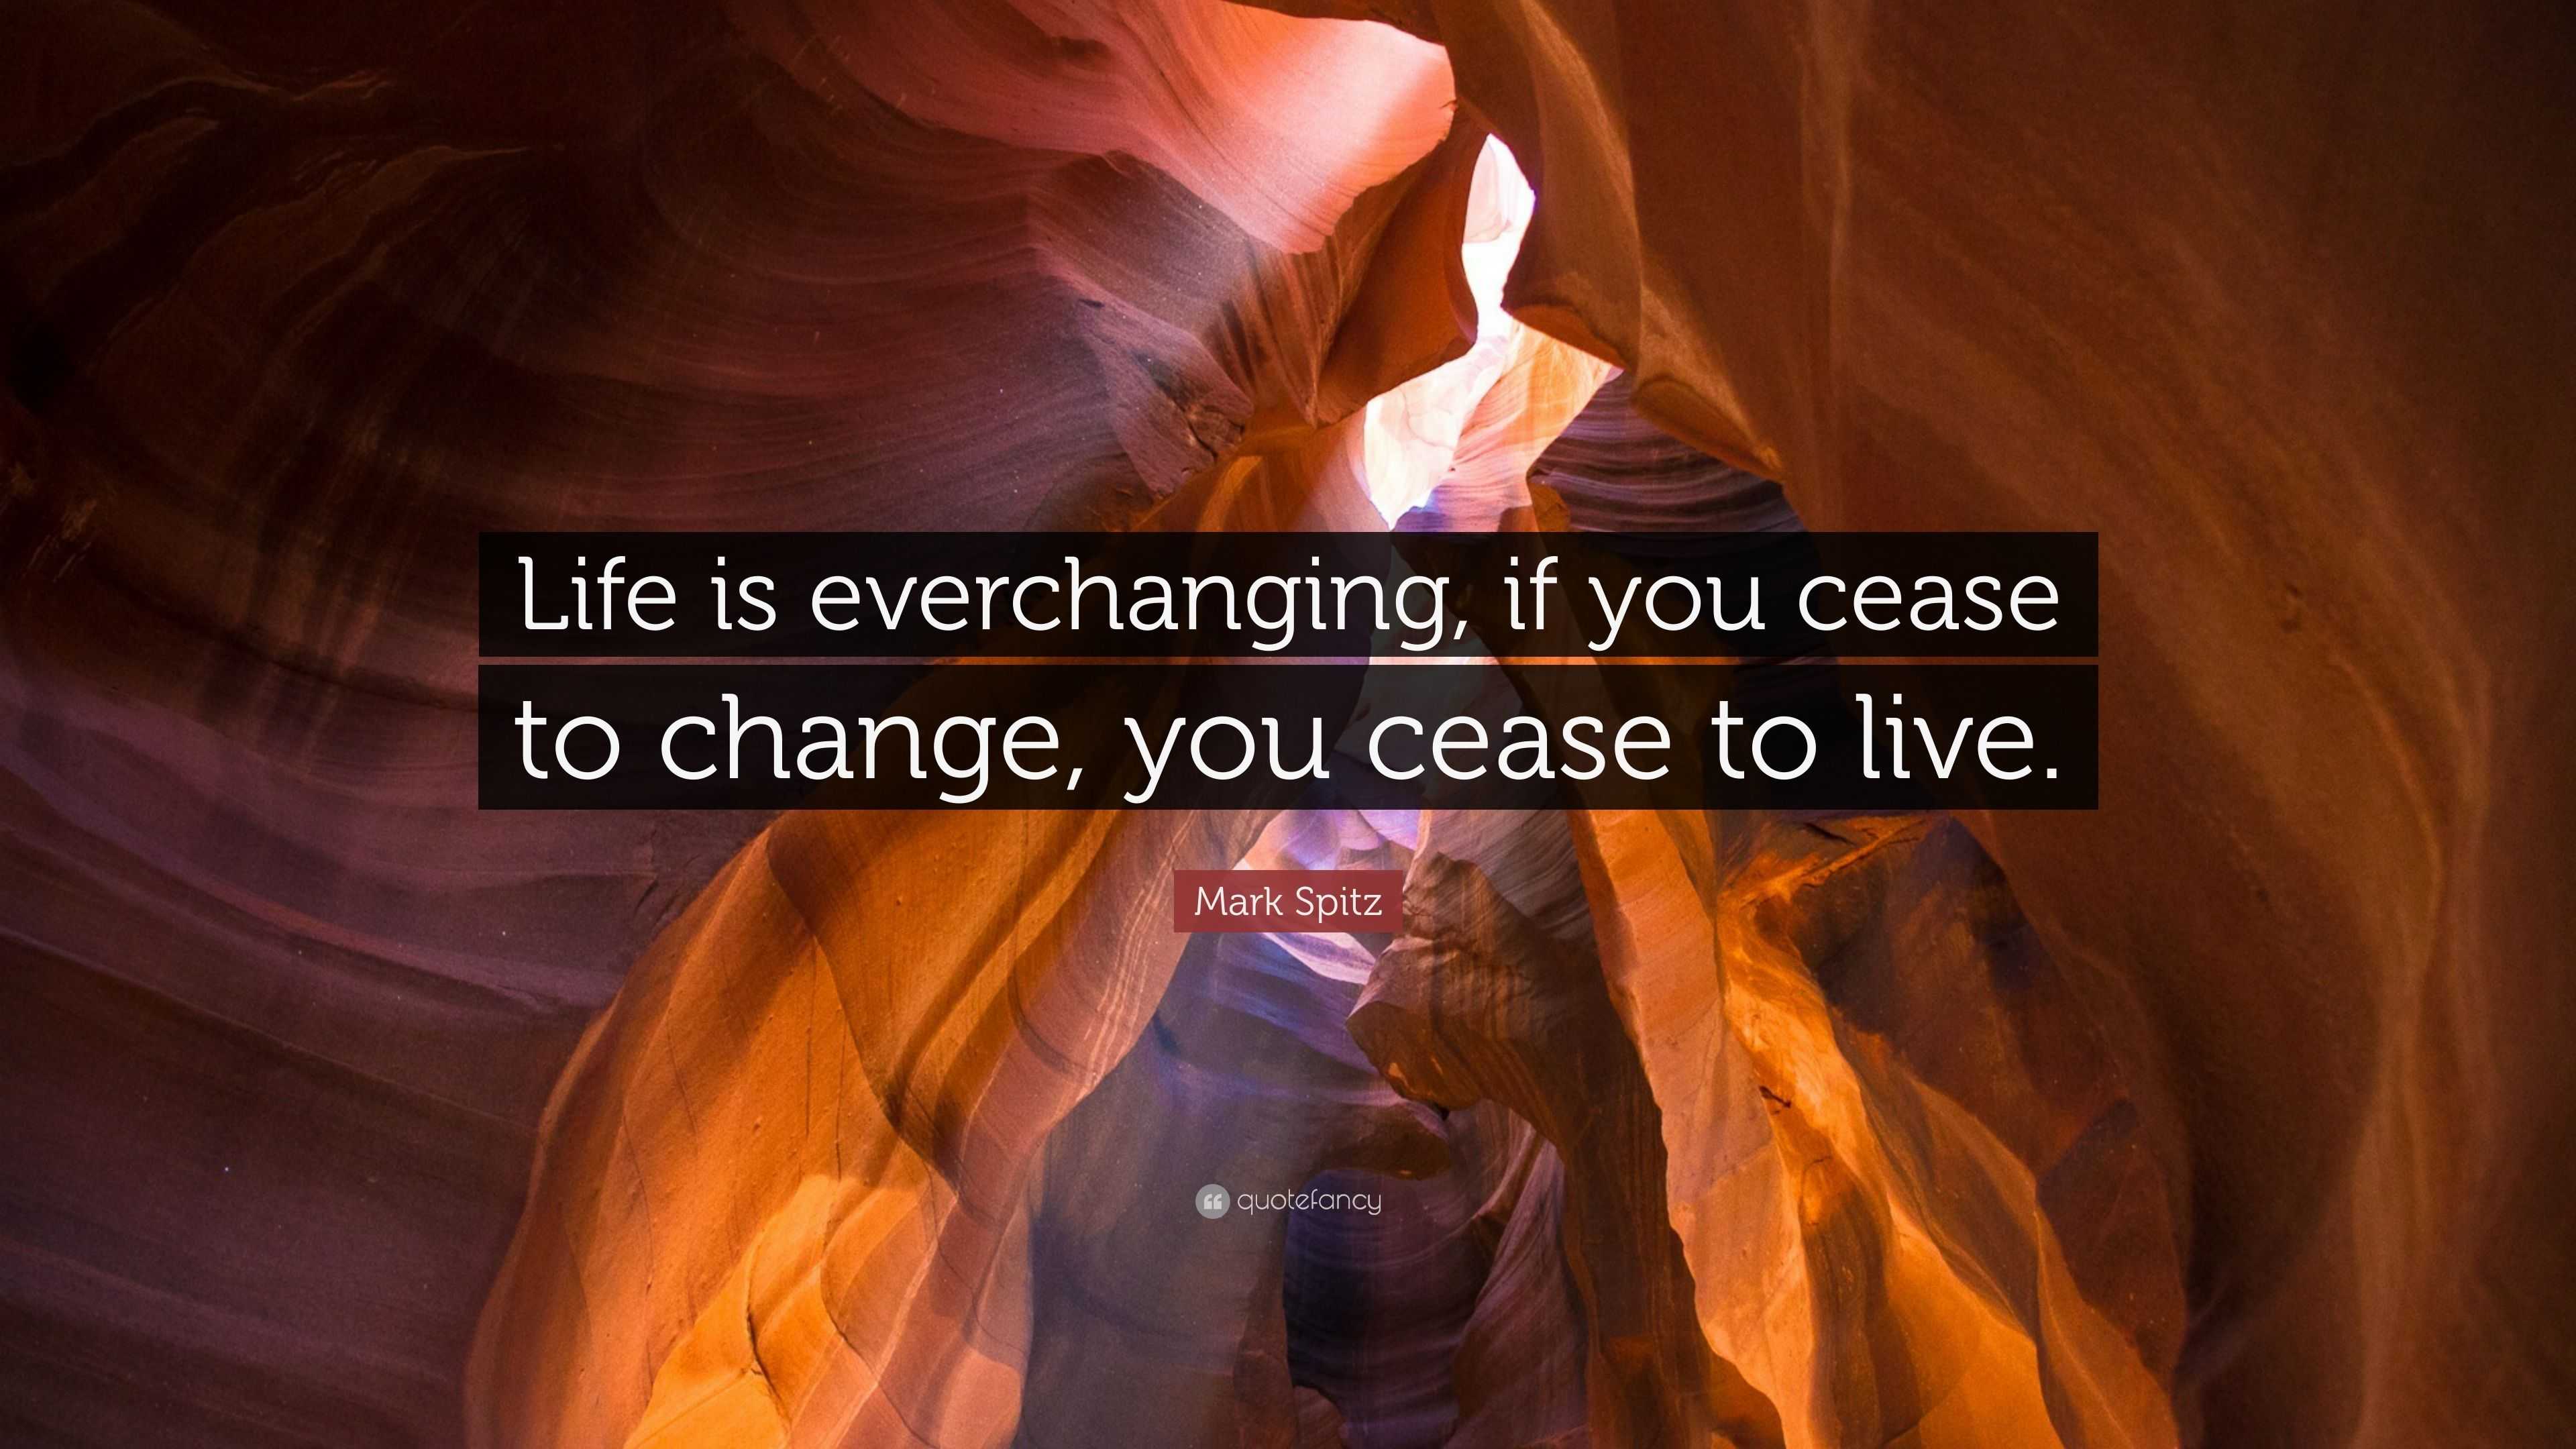 Mark Spitz Quote: “Life is everchanging, if you cease to change, you ...